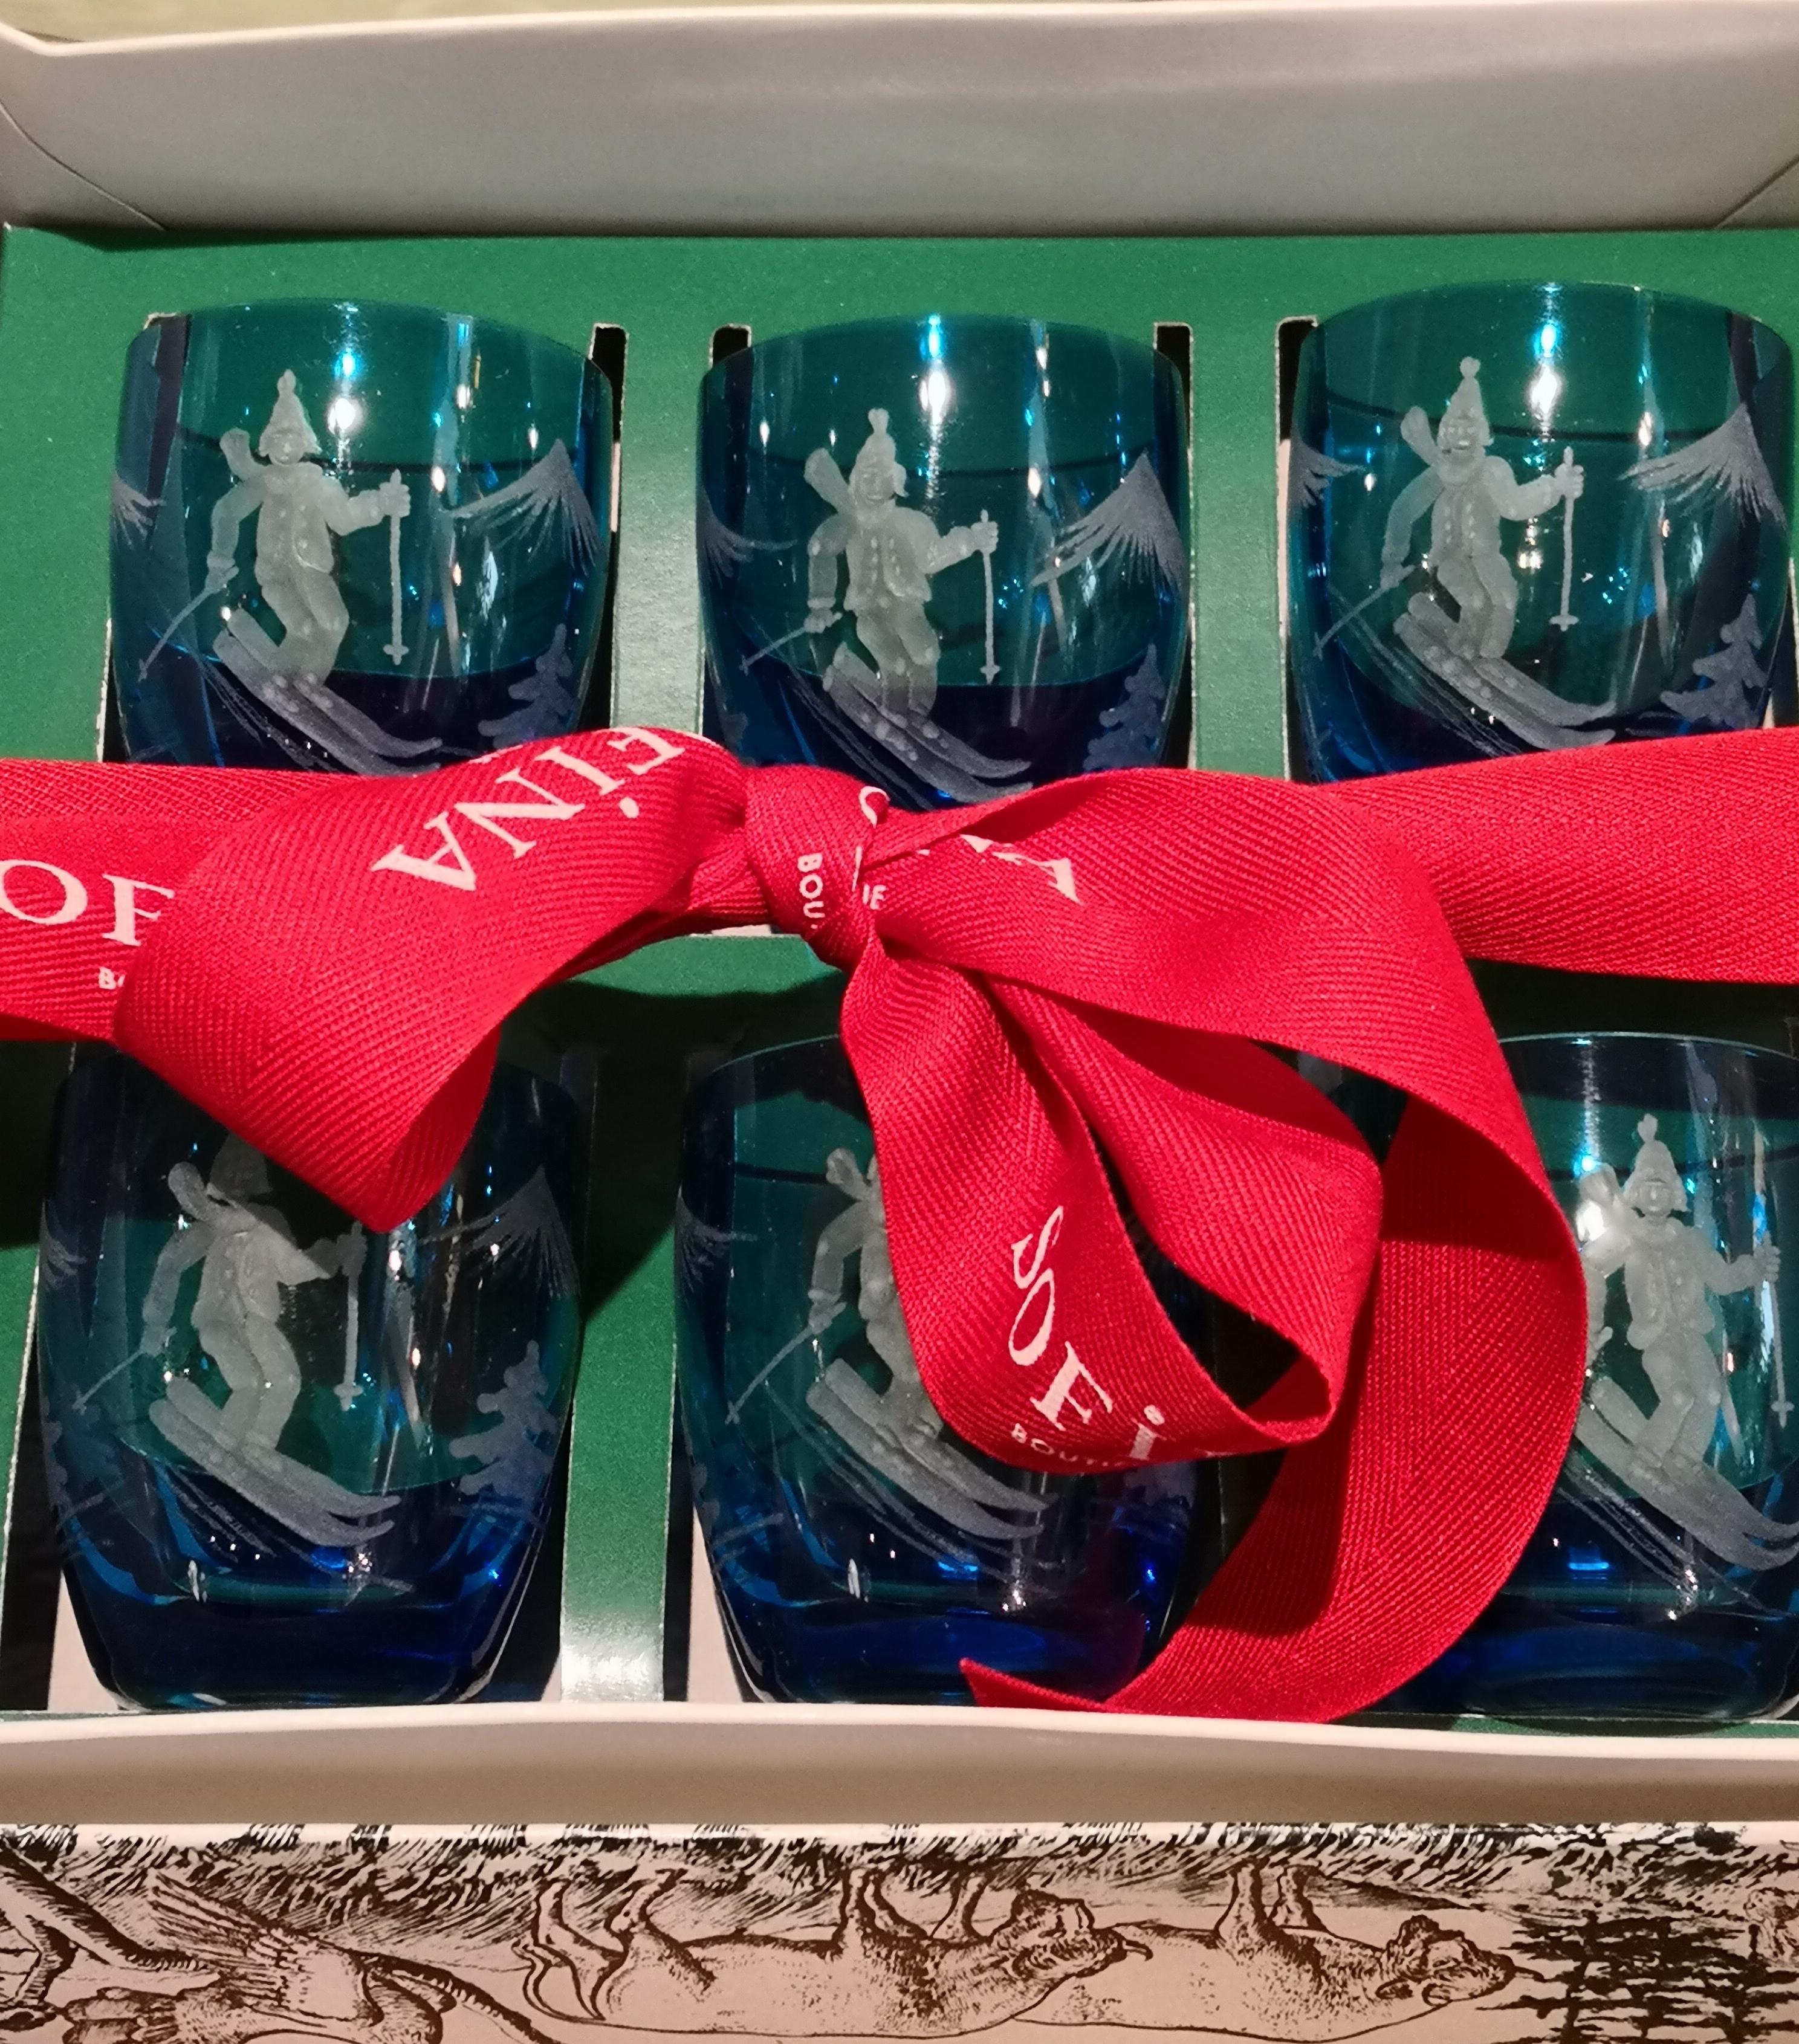 Set of six Schnapps glasses in blue crystal handmade in Bavaria. Hand blown crystal and hand-edged with a skiier and mountain decor in blue. The glasses can be ordered in different colors. Handmade by Sofina Boutique Kitzbuehel. Comes in a gift box.